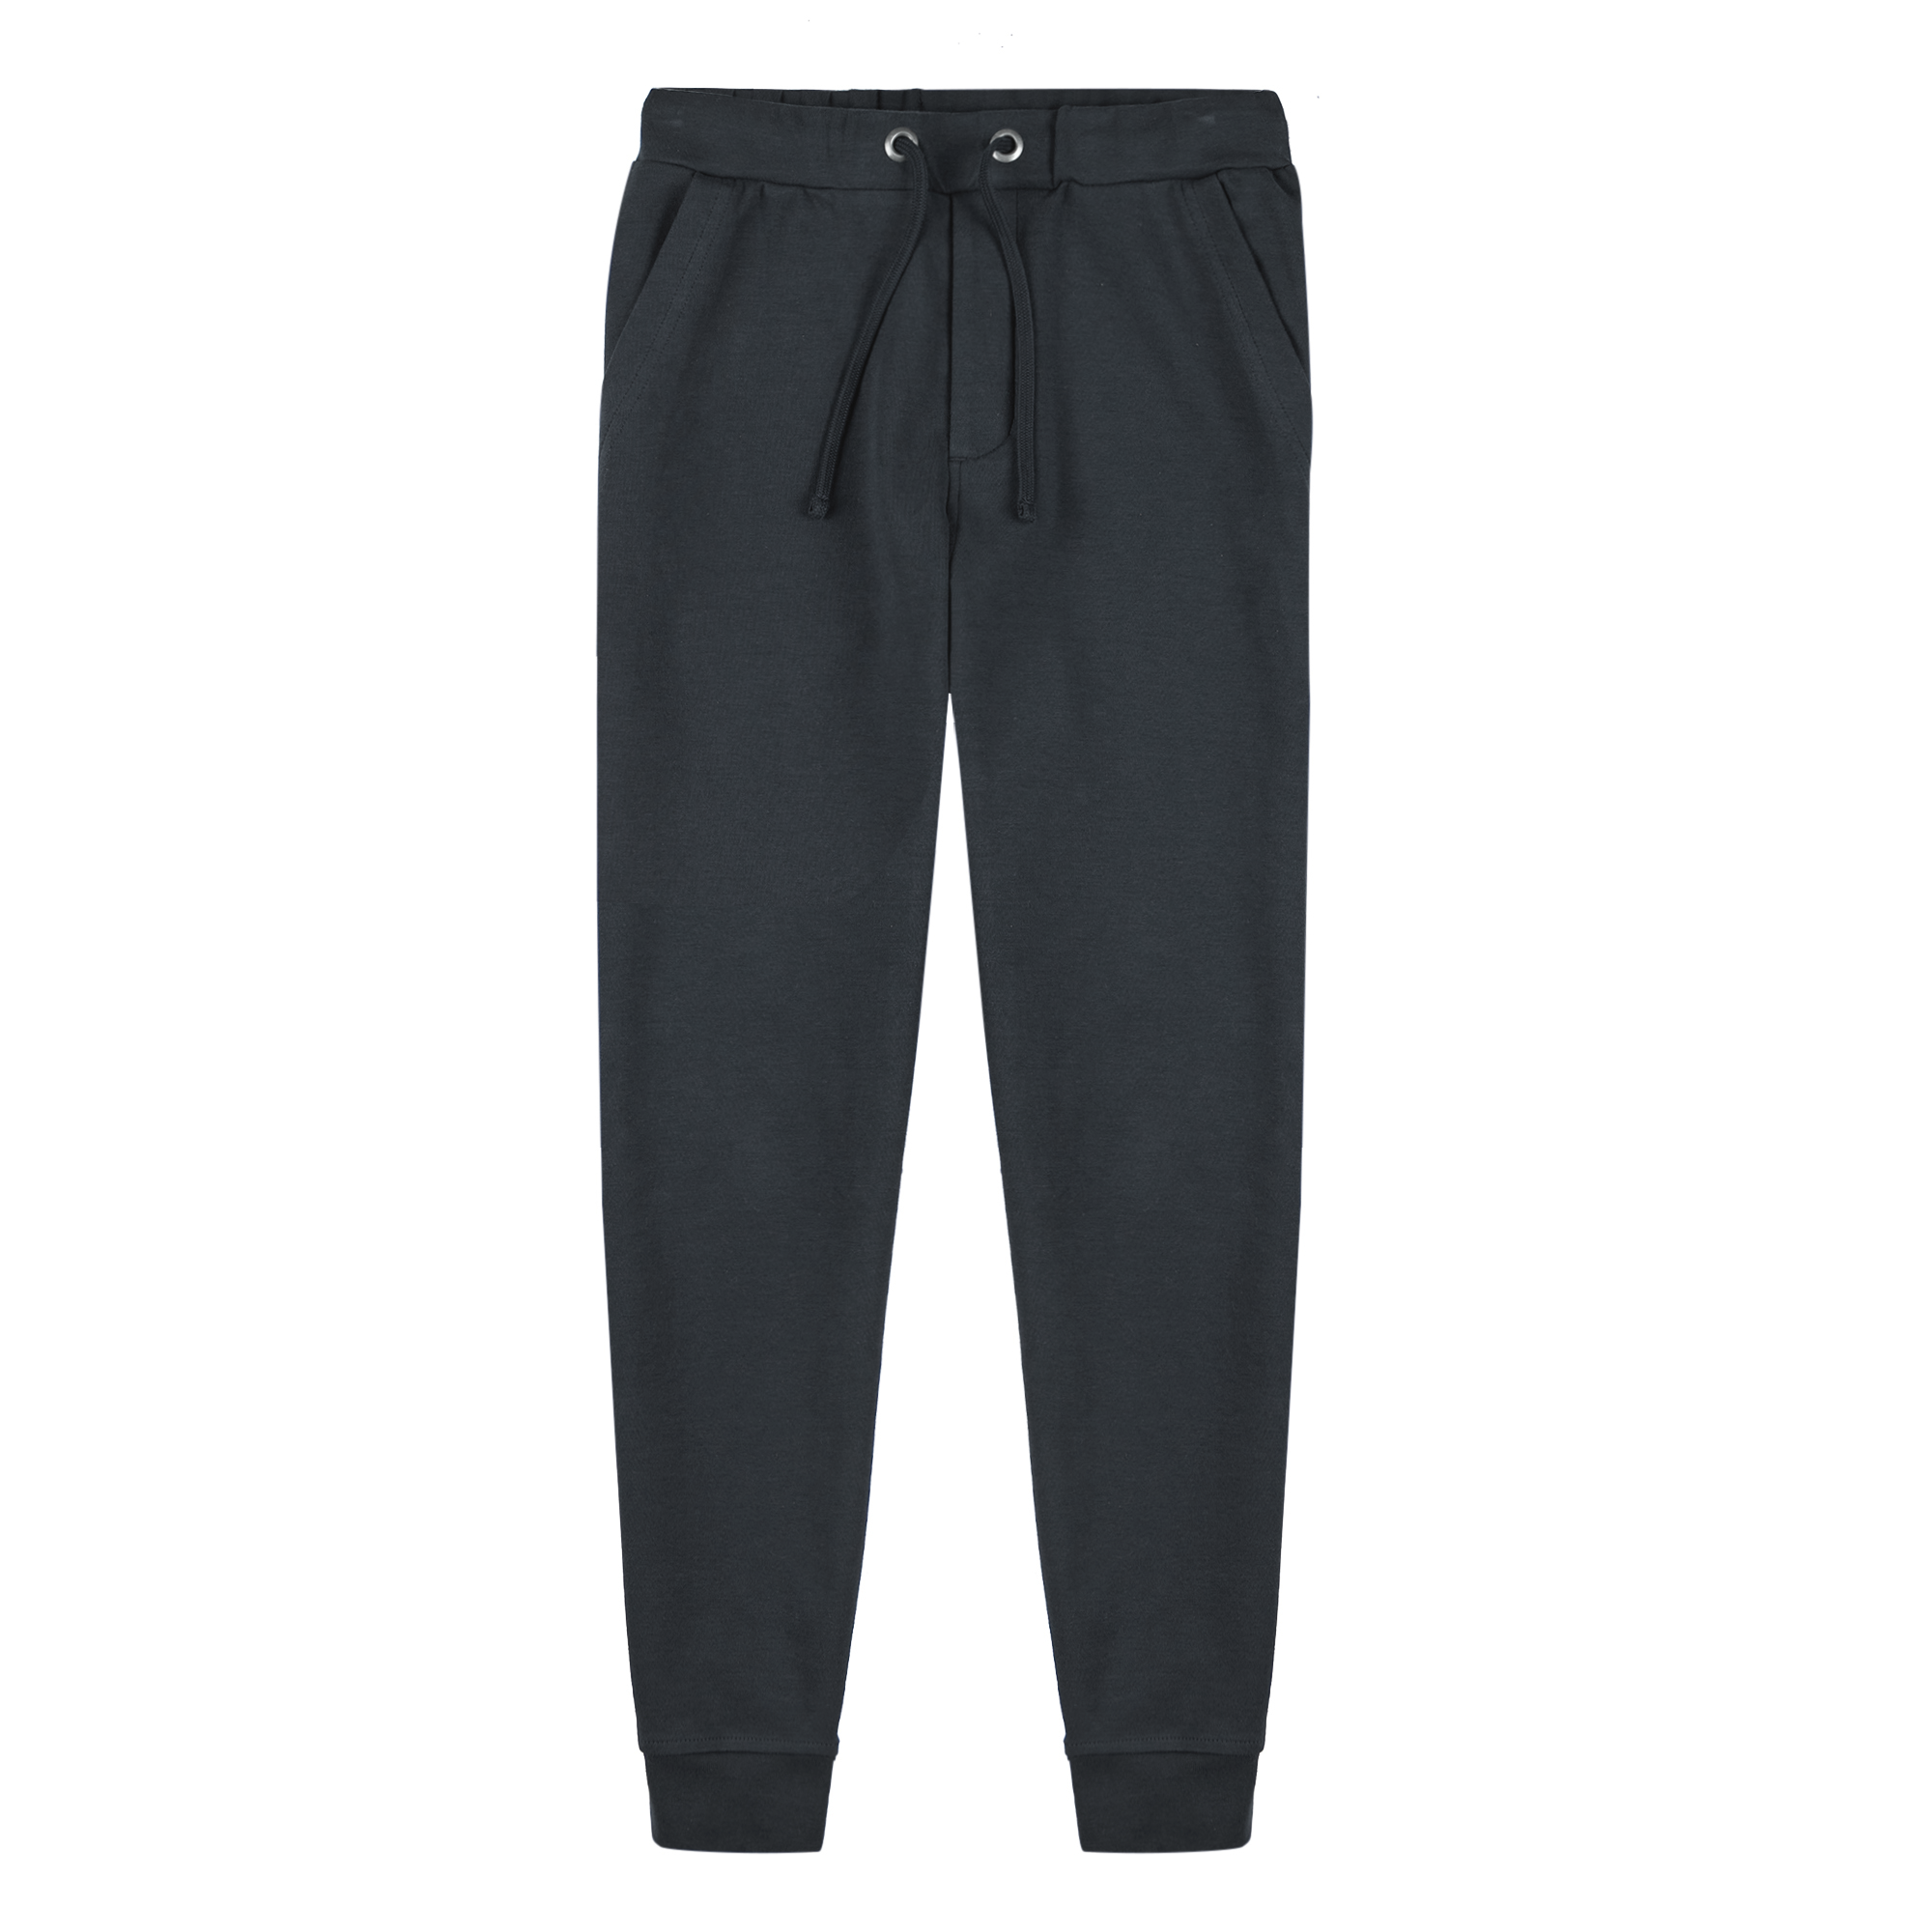 Fleece Short Men's Sweatpants - Relaxed Fit - Black Navy and Heathered